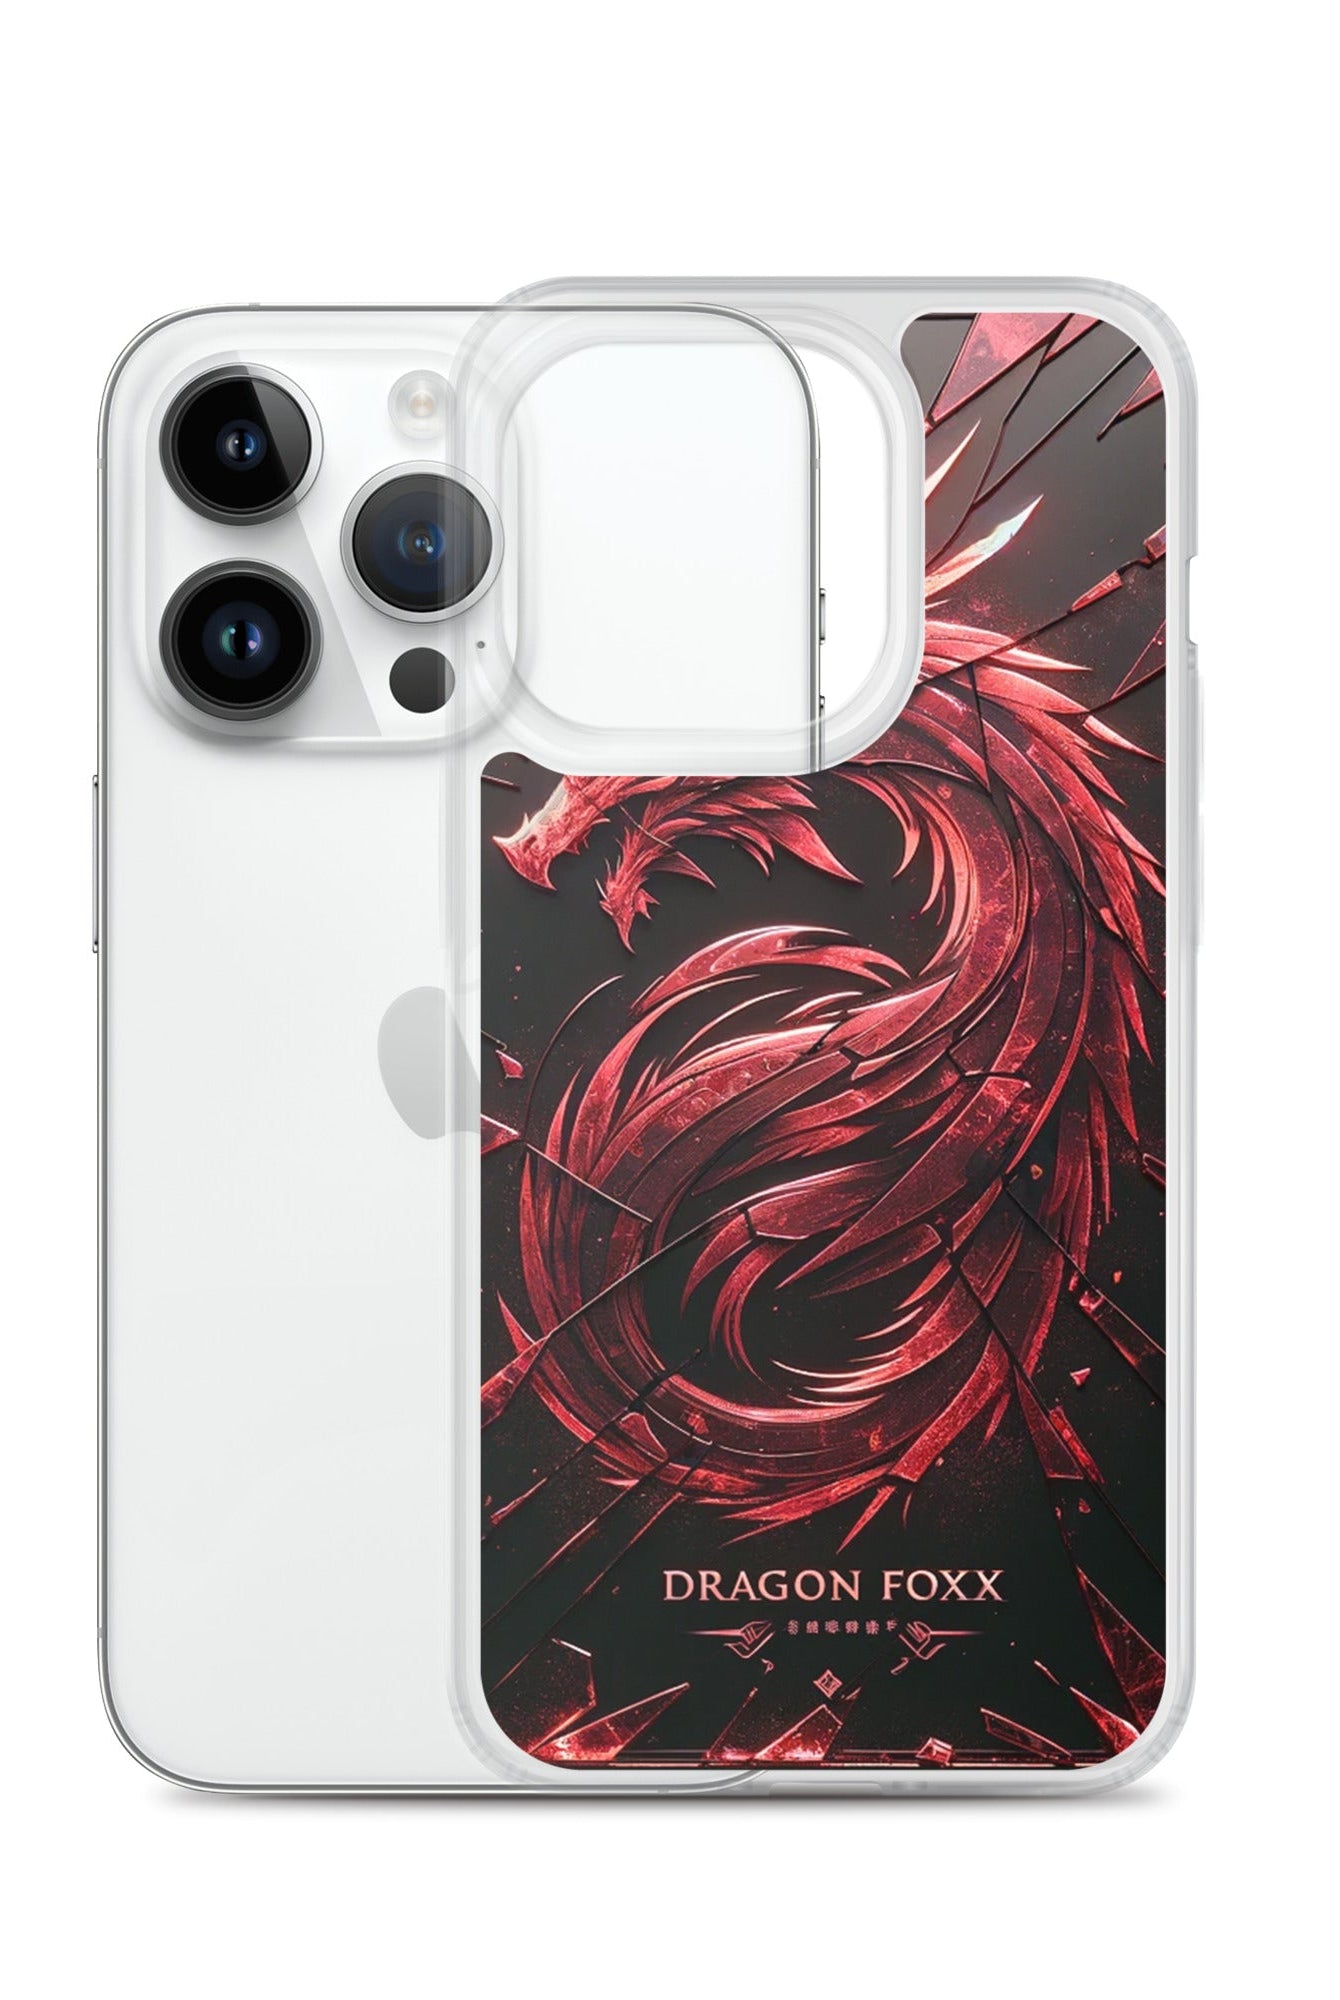 DRAGON FOXX™ Red Dragon Phone Case for iPhone® - Phone Case for iPhone® - DRAGON FOXX™ - DRAGON FOXX™ Red Dragon Phone Case for iPhone® - 7805351_16241 - iPhone 14 Pro - Red/Black/Clear - Accessories - Dragon Foxx™ - DRAGON FOXX™ Phone Case for iPhone®